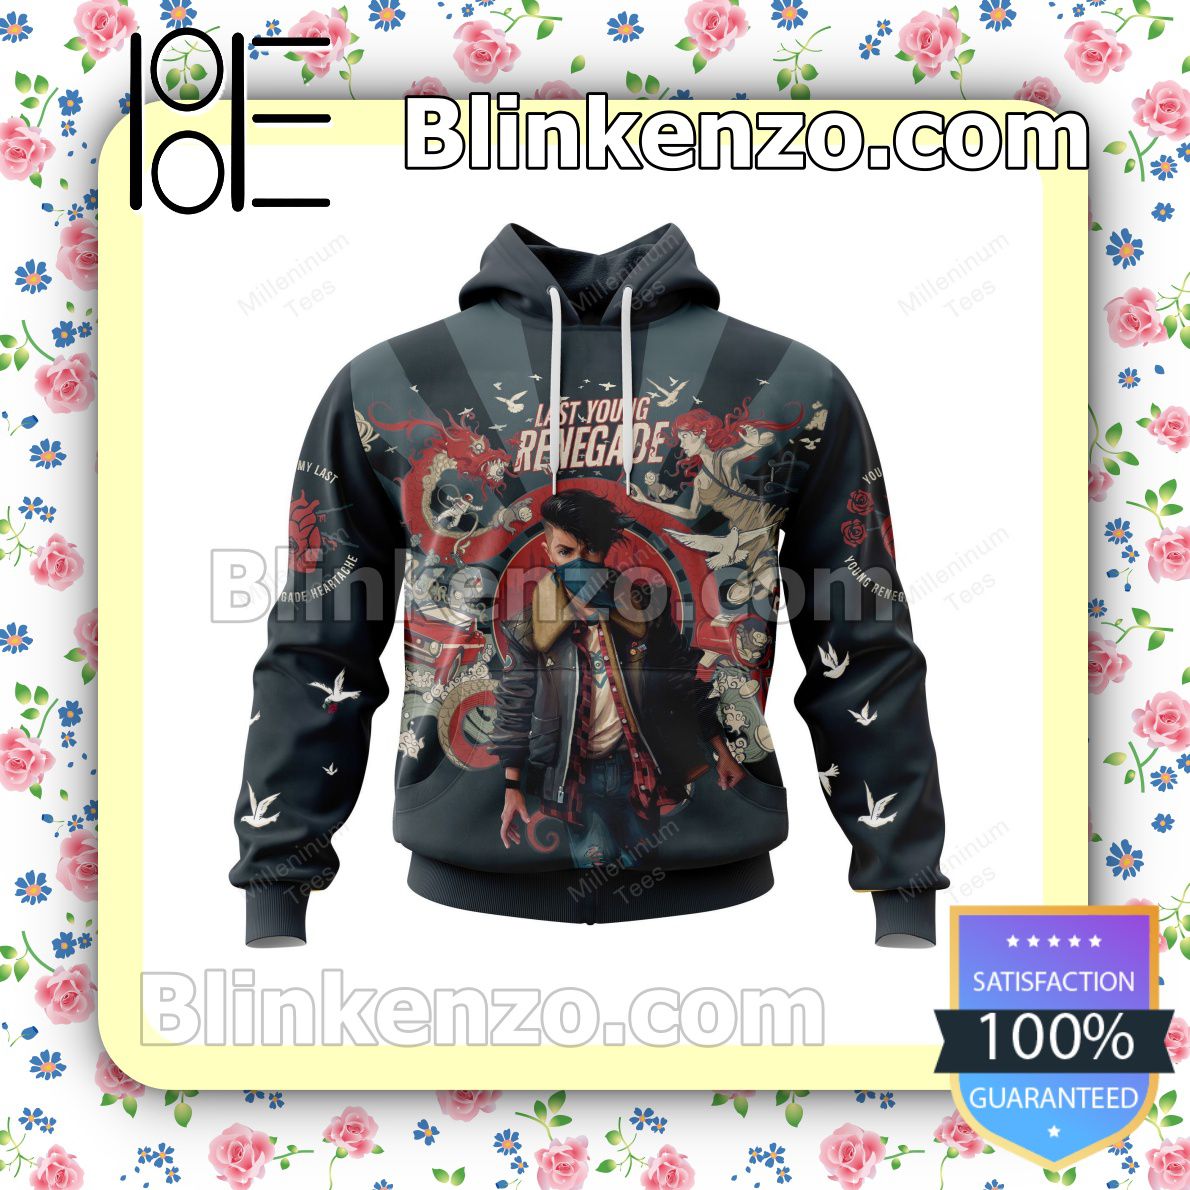 Personalized All Time Low Last Young Renegade Album Cover Hooded Sweatshirt